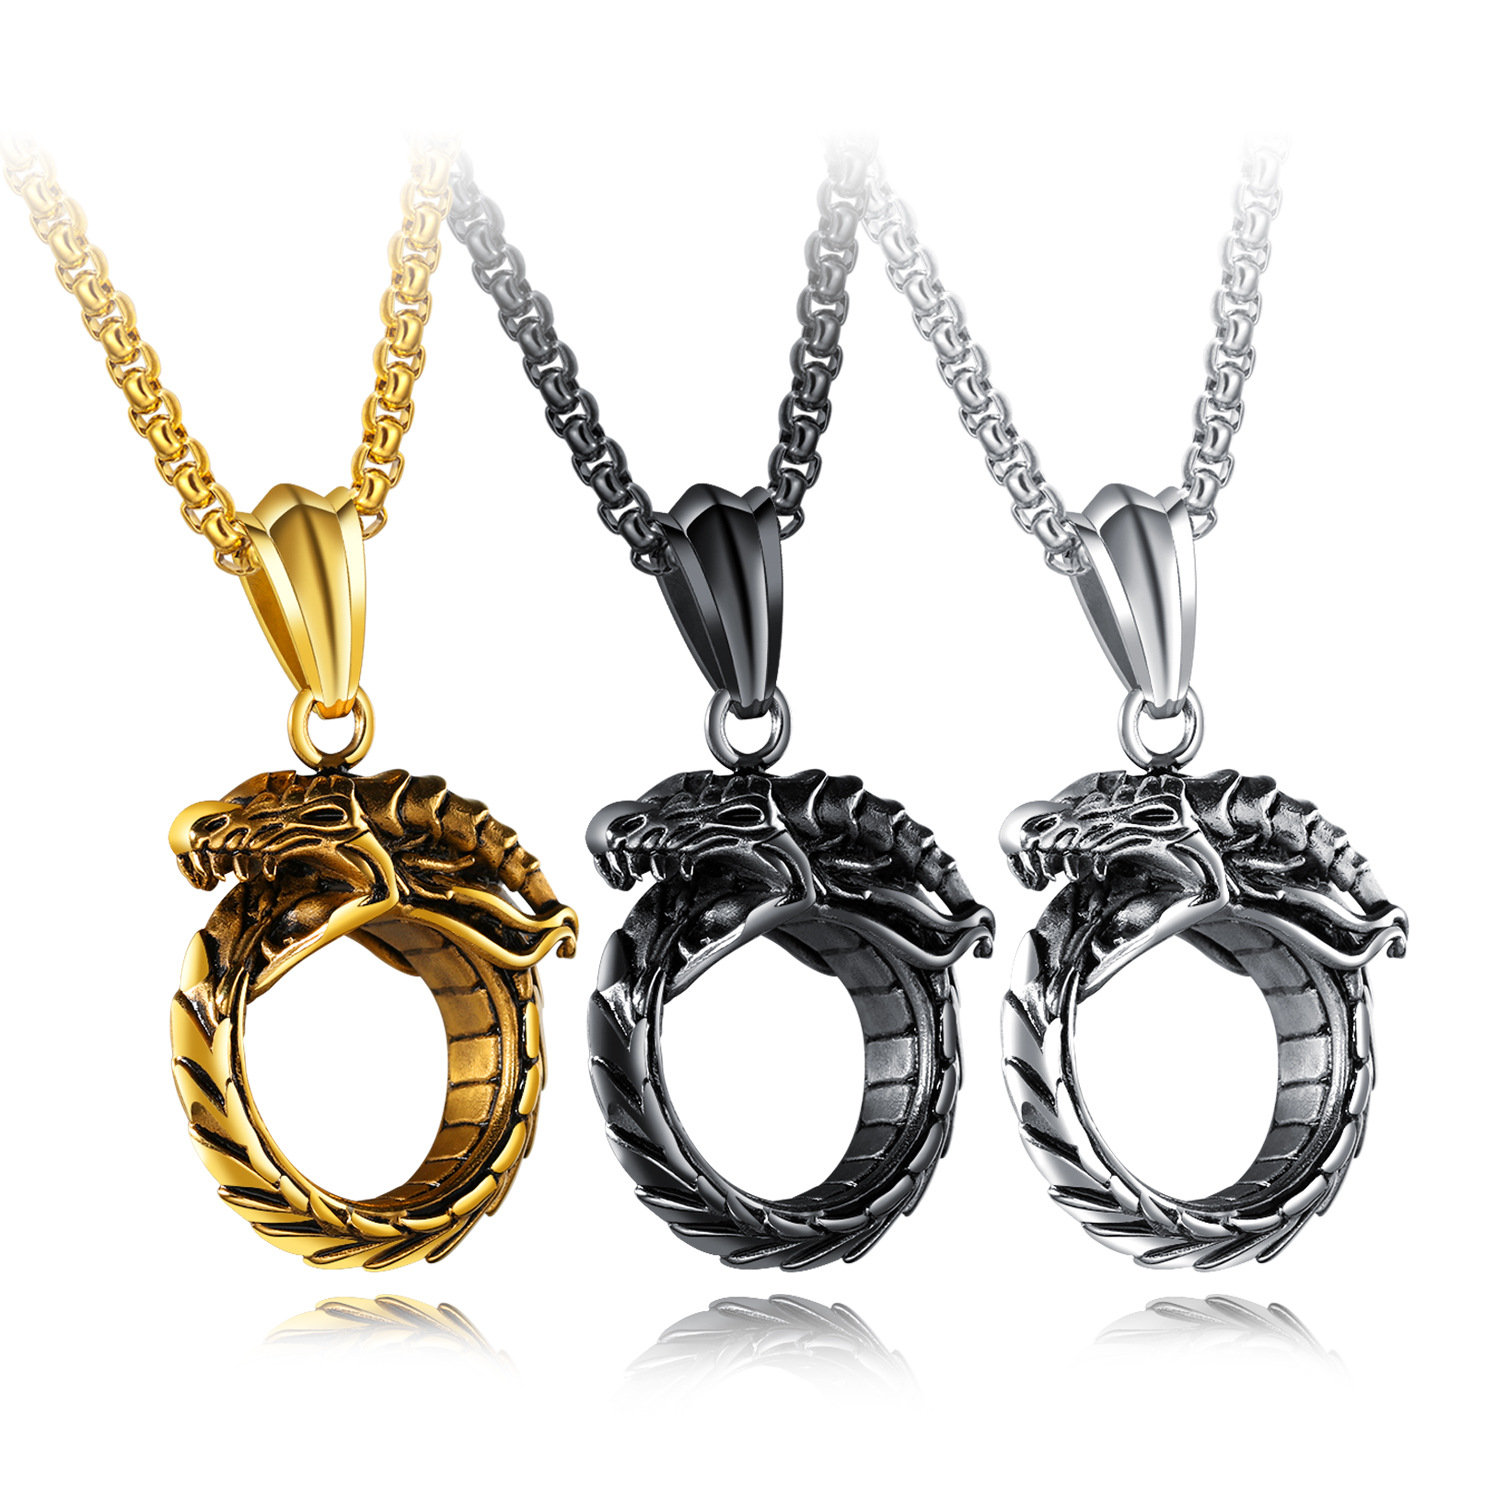 Punk Men's Stainless Steel Ouroboros Serpent Bite Tail Charm Necklace Vintage Jewelry for Men